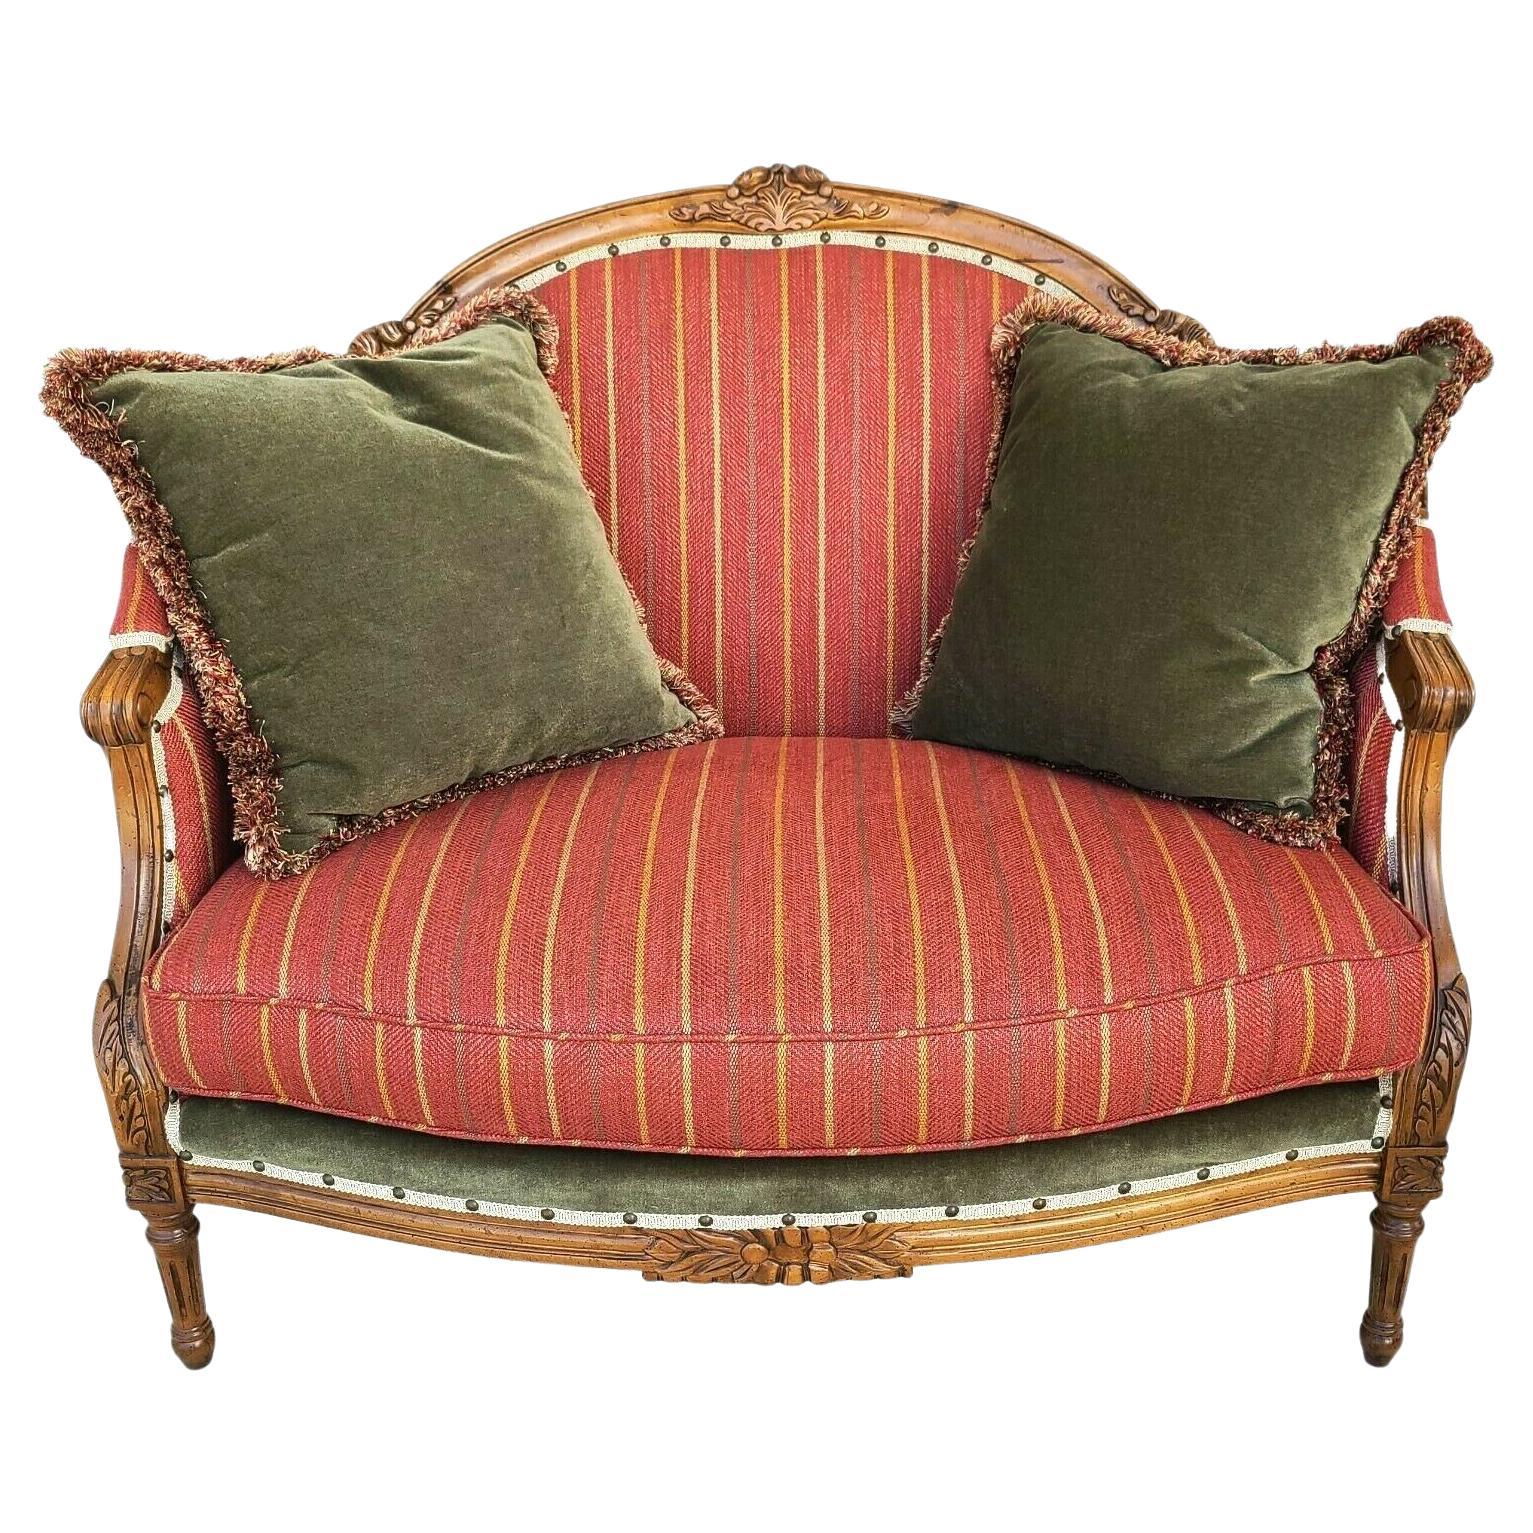 French Provincial Deirdre Settee by Paul Robert